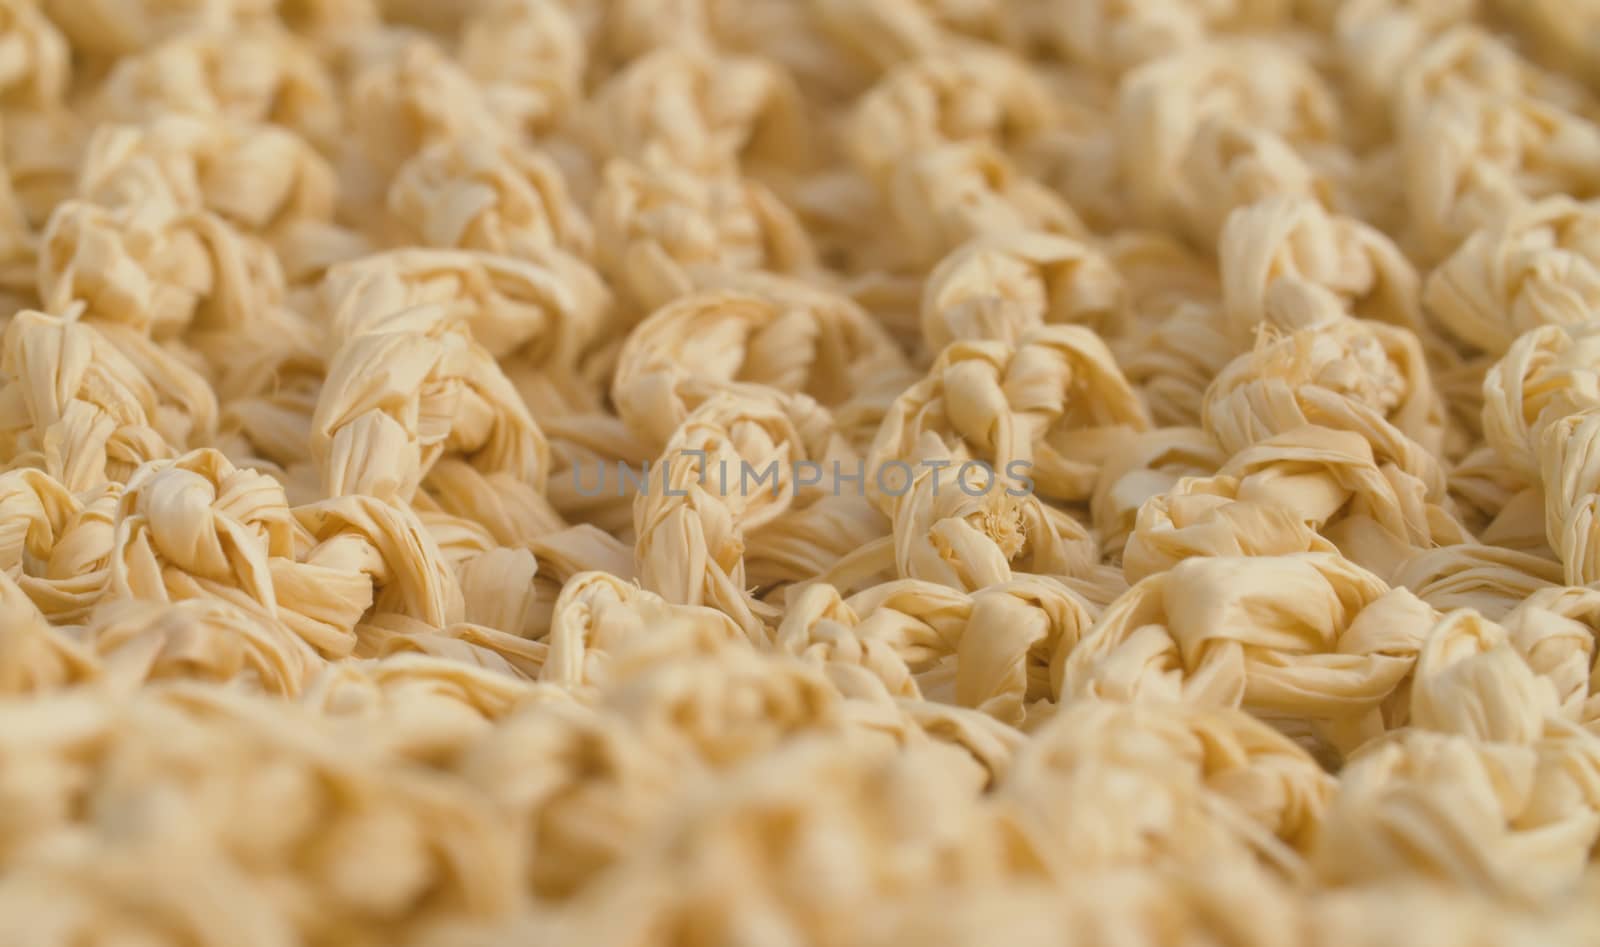 Macro wicker straw, background, texture. Close up footage of decoration natural textured from straw or thatch.